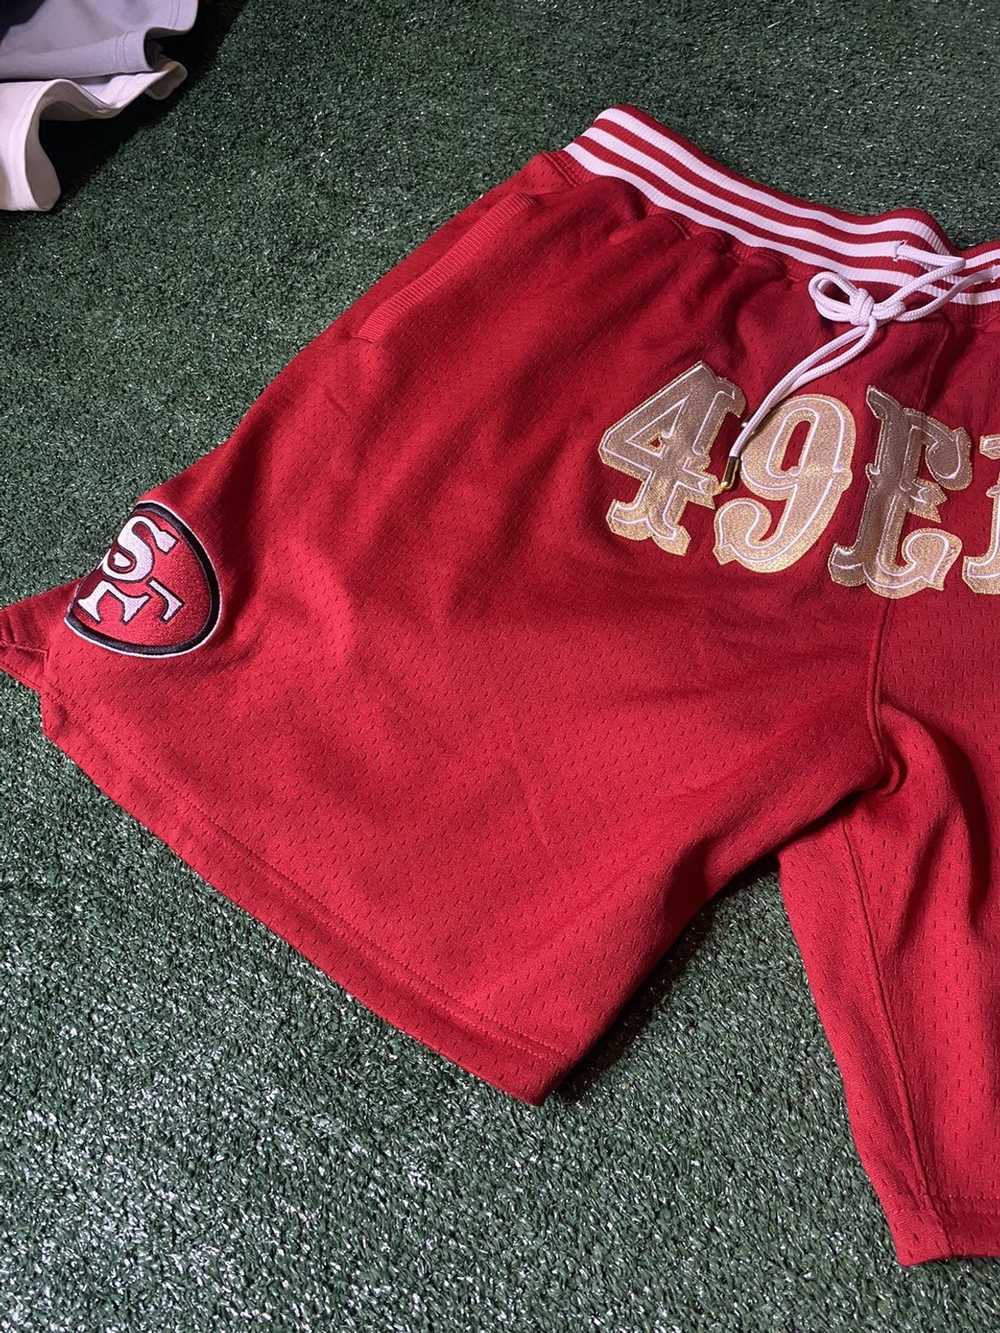 Just Don Just Don San Fransisco 49ers Shorts XXL … - image 3